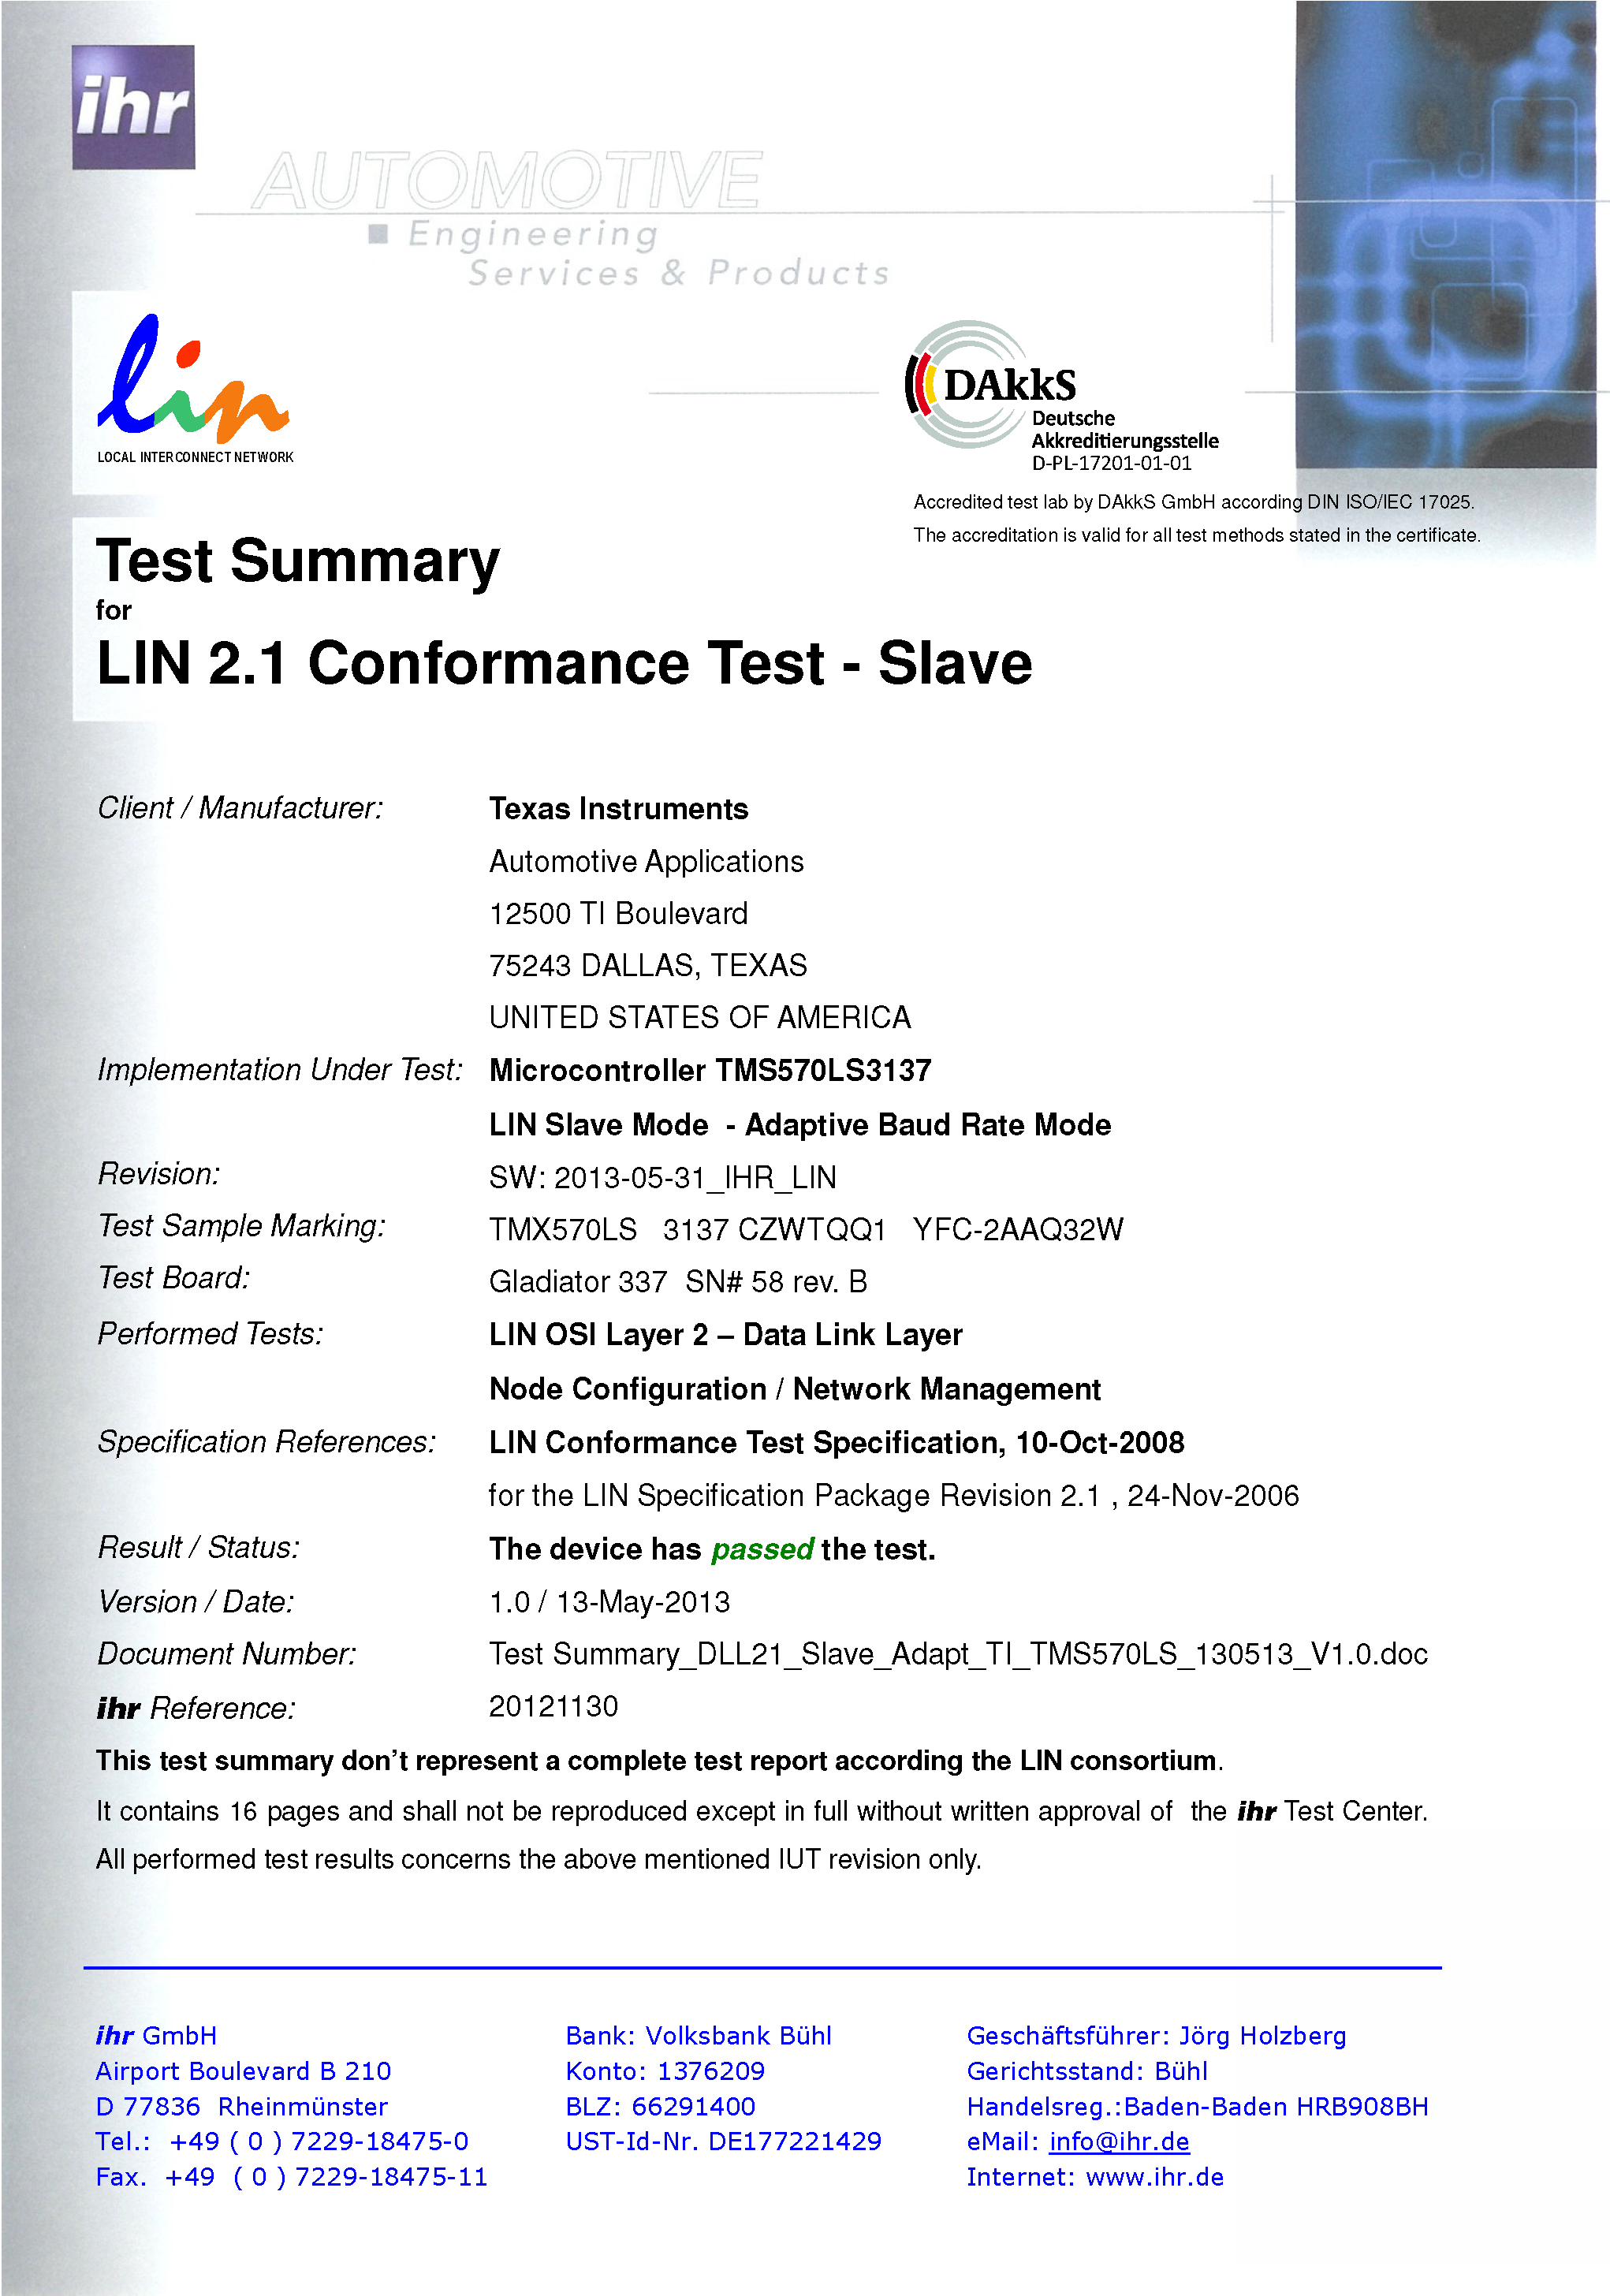 TMS570LS3134 TMS570LS2134 TMS570LS2124 new_LIN_Certification_Slave_Adapt.png